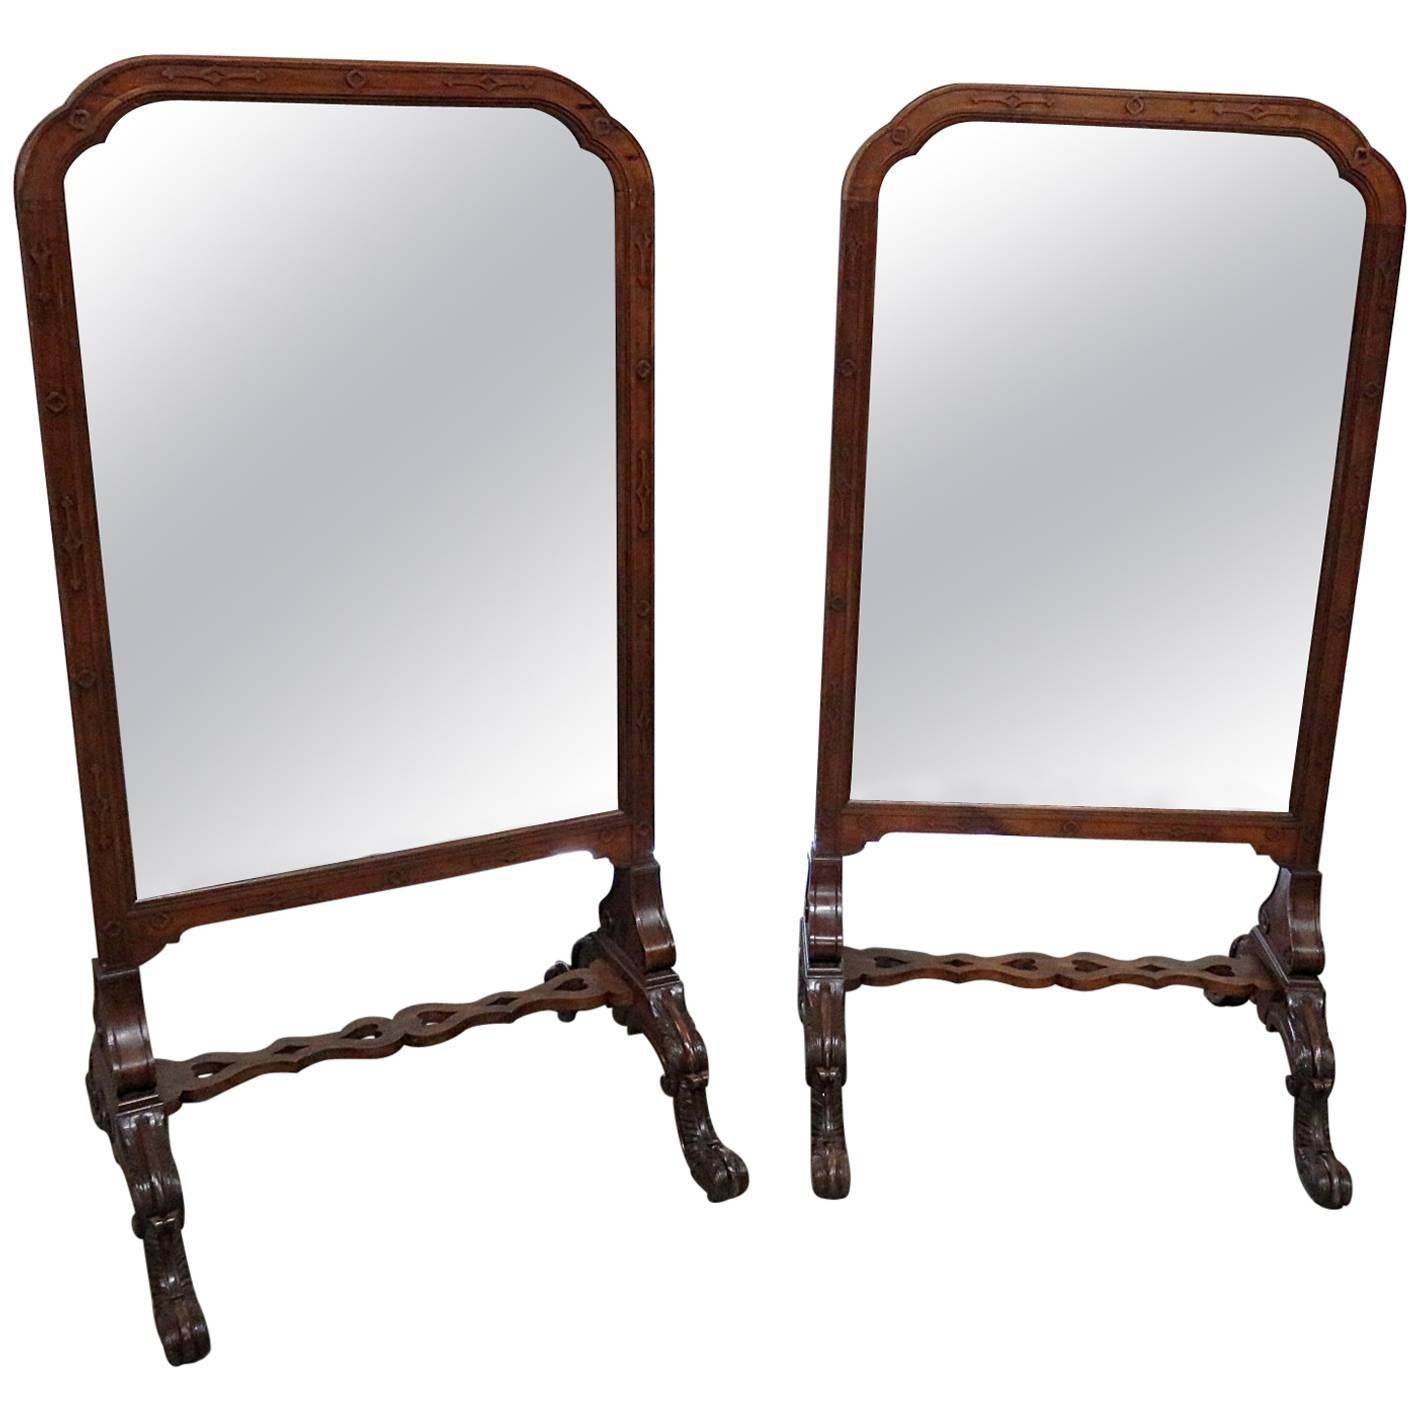 Pair of English Carved Walnut Standing Mirrors